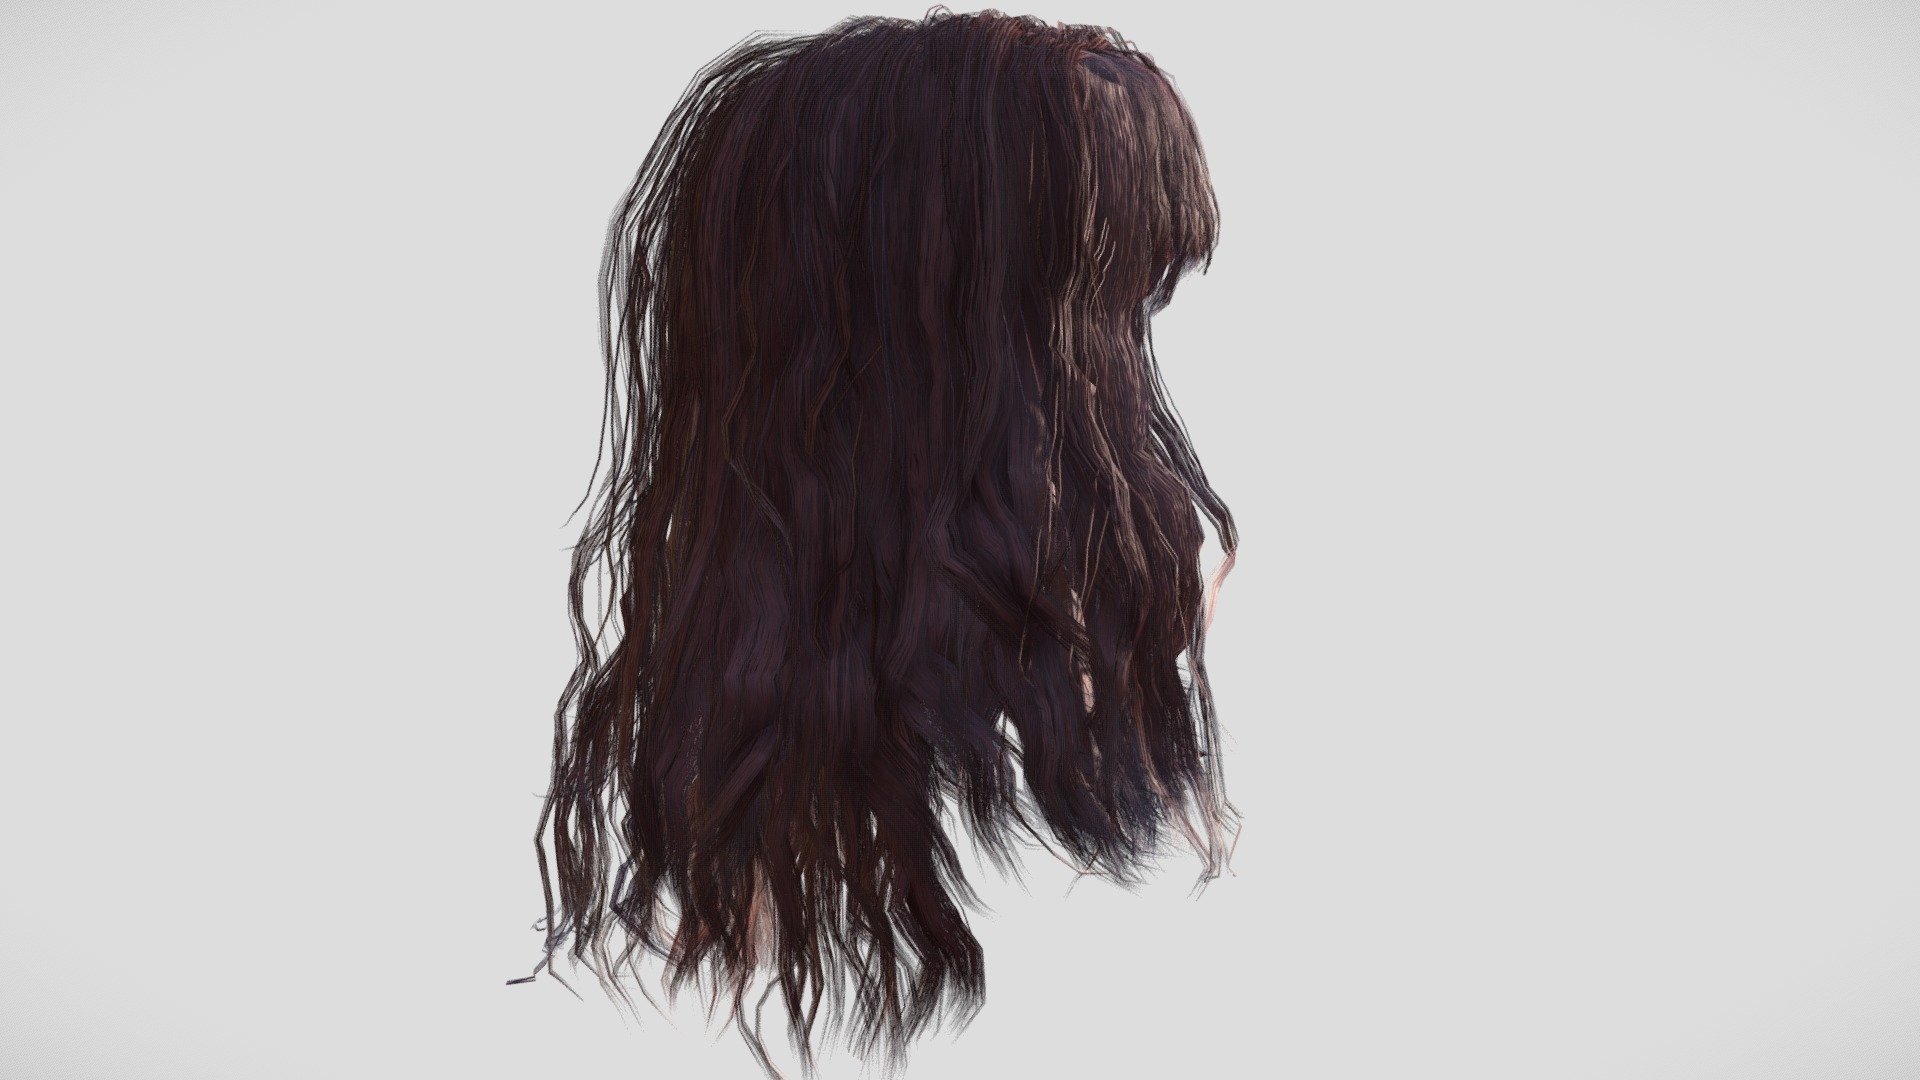 Hairstyle for your female3d character!

GEOMETRY:
The haircut is made with quad polygon geometry, a.k.a hair cards. The hair geometry is meticulously constructed with a single edge flowing through the center for easy rigging and intuitive spline manipulation.

TEXTURES:(4096x4096):
    o - used to simulate Ambient Occlusion effect
    z - used to simulate Unreal's Pixel Depth Offset effect
    flow - used to control the direction of reflection normal
    id - used for cross-strand color variation
    op - used to manipulate opacity or alpha
    root - used for gradual root coloring along the flow of the strand
    base - Base texture

The textures are compatible with the new Smart Hair system within Reallusion Character Creator, which is made to be used with both UnrealEngine and Unity.

EXTRA:
The hairstyle also includes the scalp geometry and textures to prevent the skin from peaking through the hair strands thus creating an unrealistic-looking hairstyle.

Happy characterizing!

**NOTES:
* Head not included - Female Hair - 002 - 3D model by Scanlab Photogrammetry Inc. (@scanlabstudio) 3d model